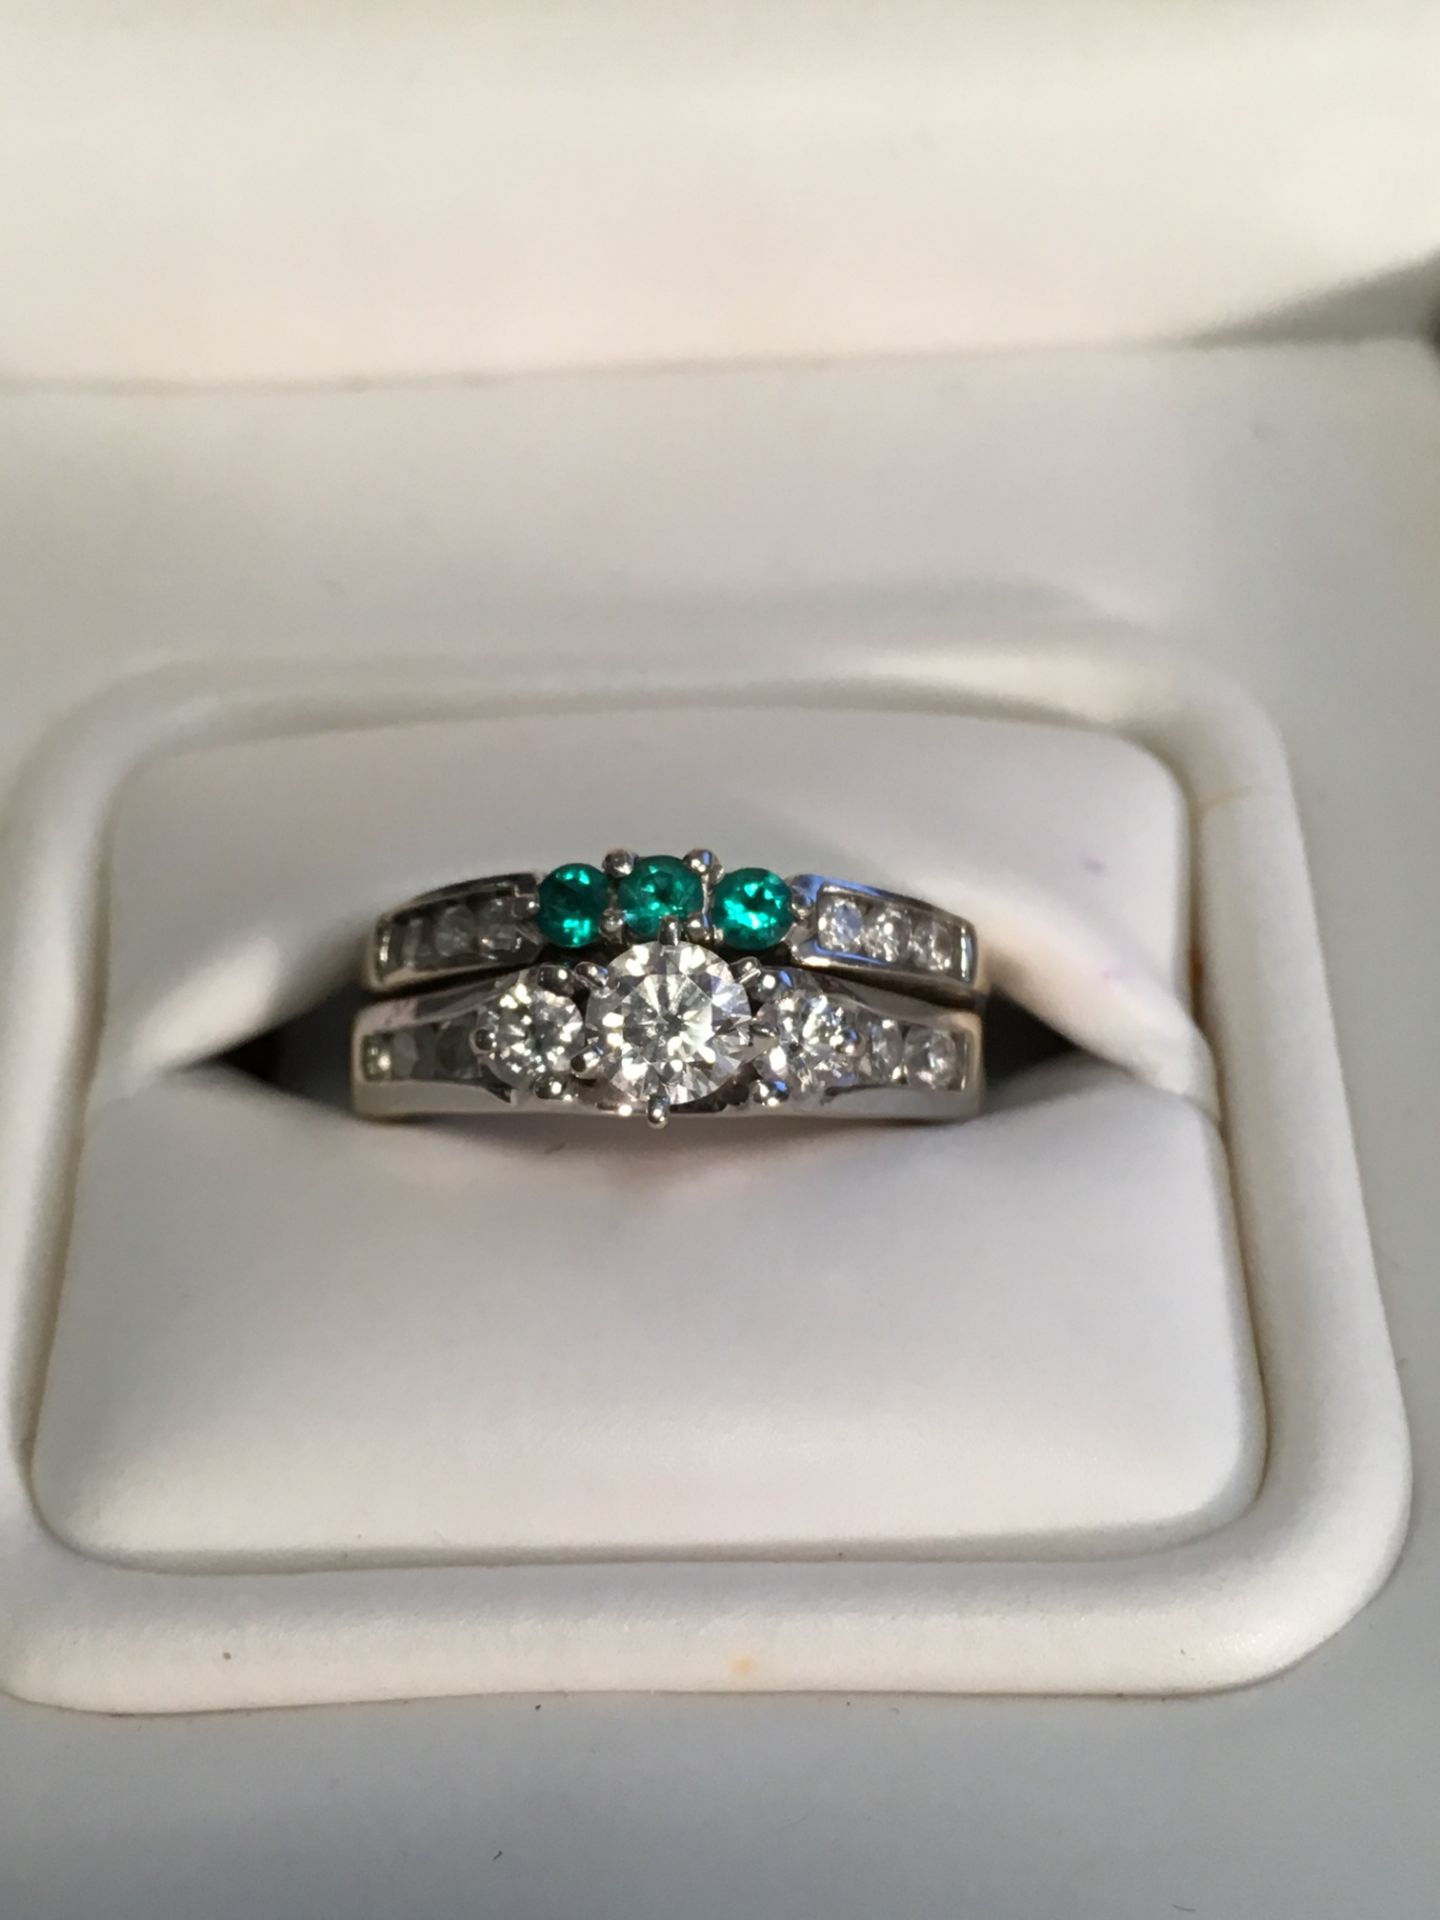 LOVE STORY 2 x RING SET, DIAMOND & EMERALD SET IN 14ct GOLD - Image 3 of 5